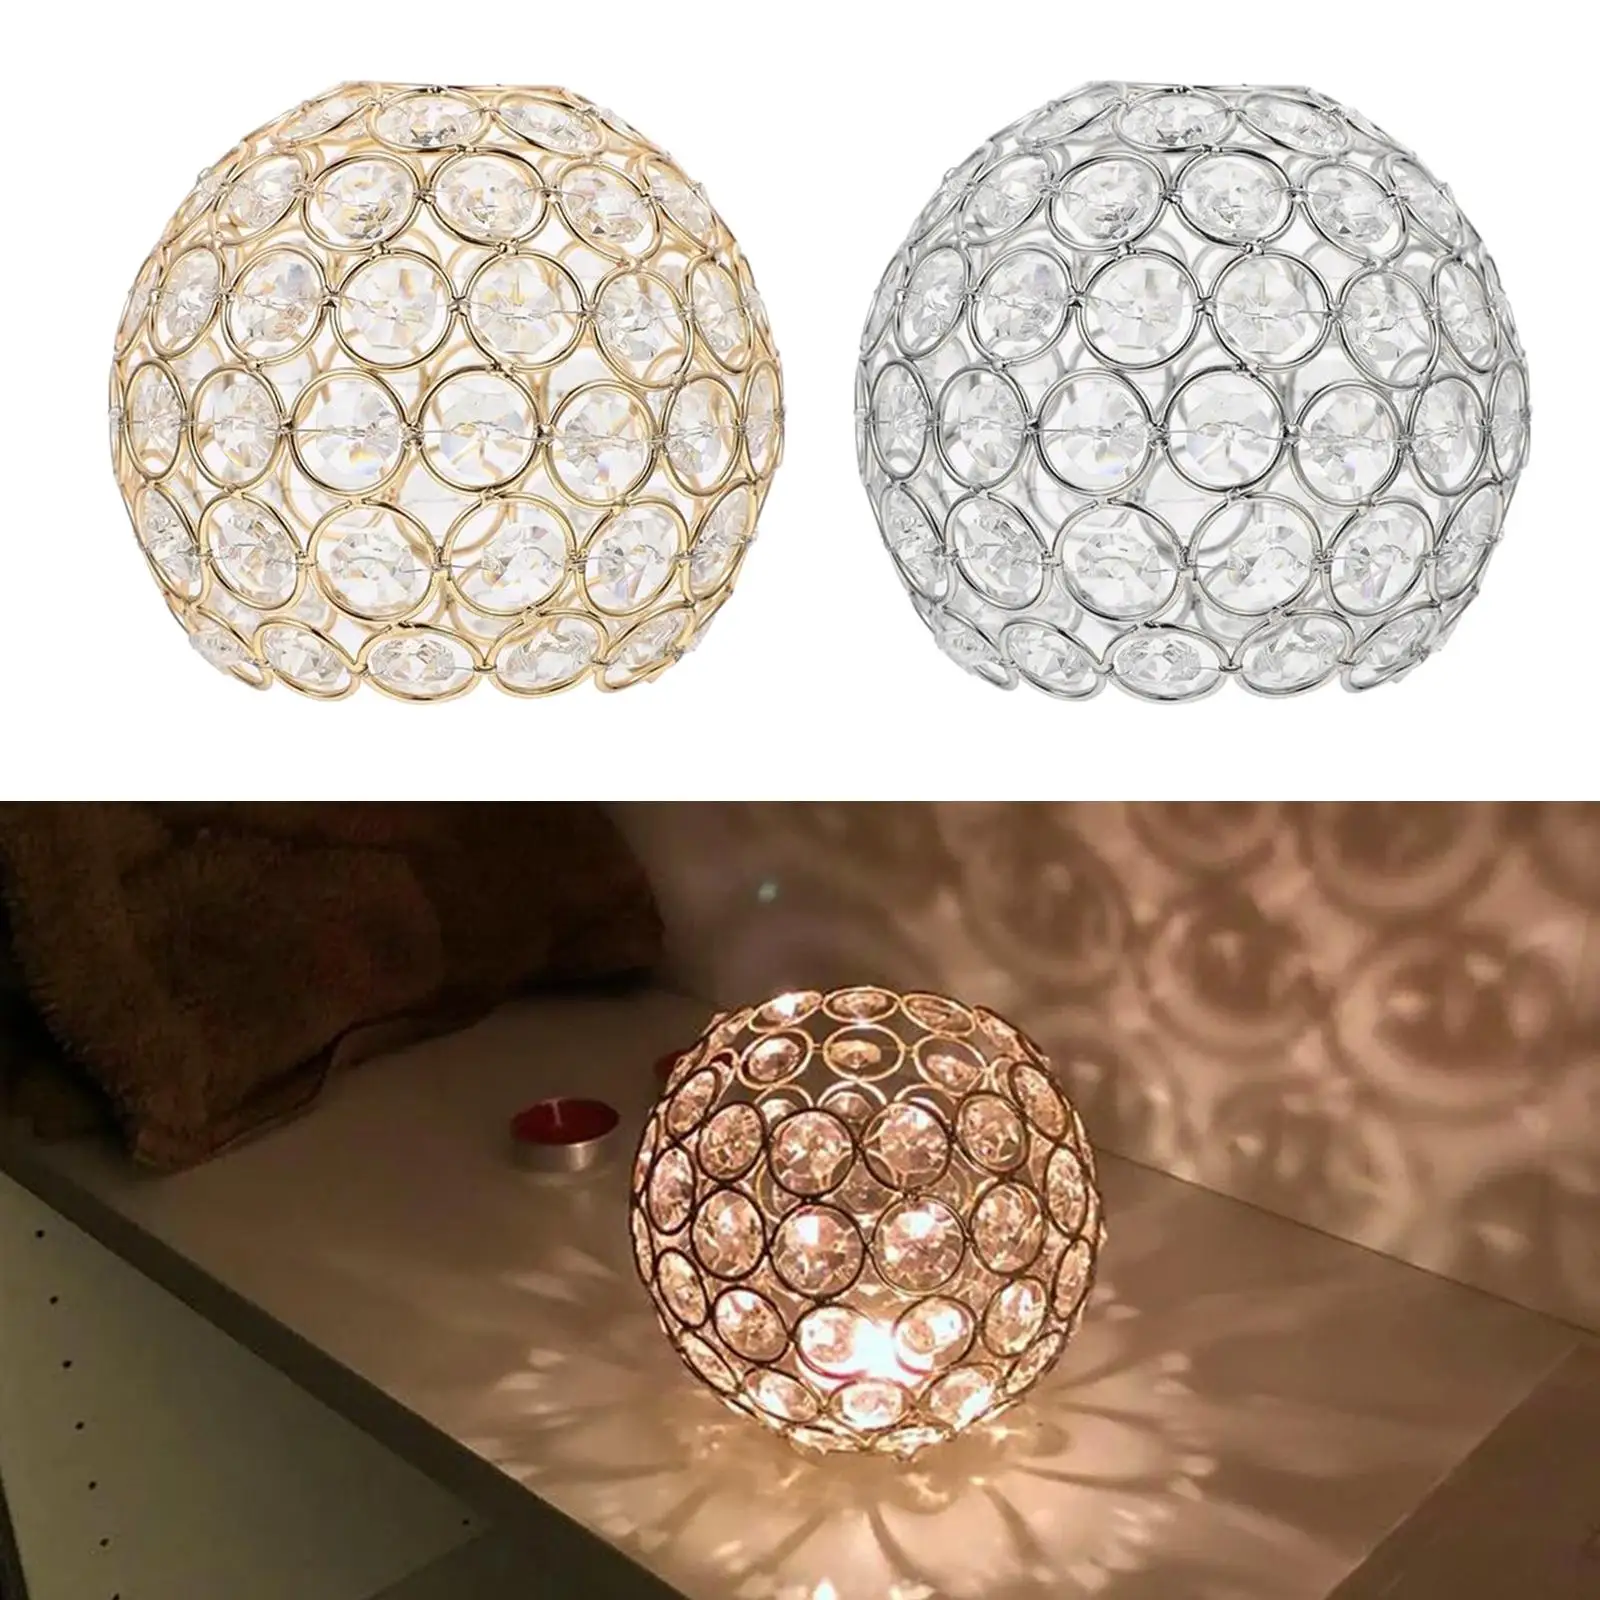 Shiny Ceiling Light Shade Replacement Cover Fitting Chandelier Crystal Lampshade Only for Wedding Bathroom Home Library Party